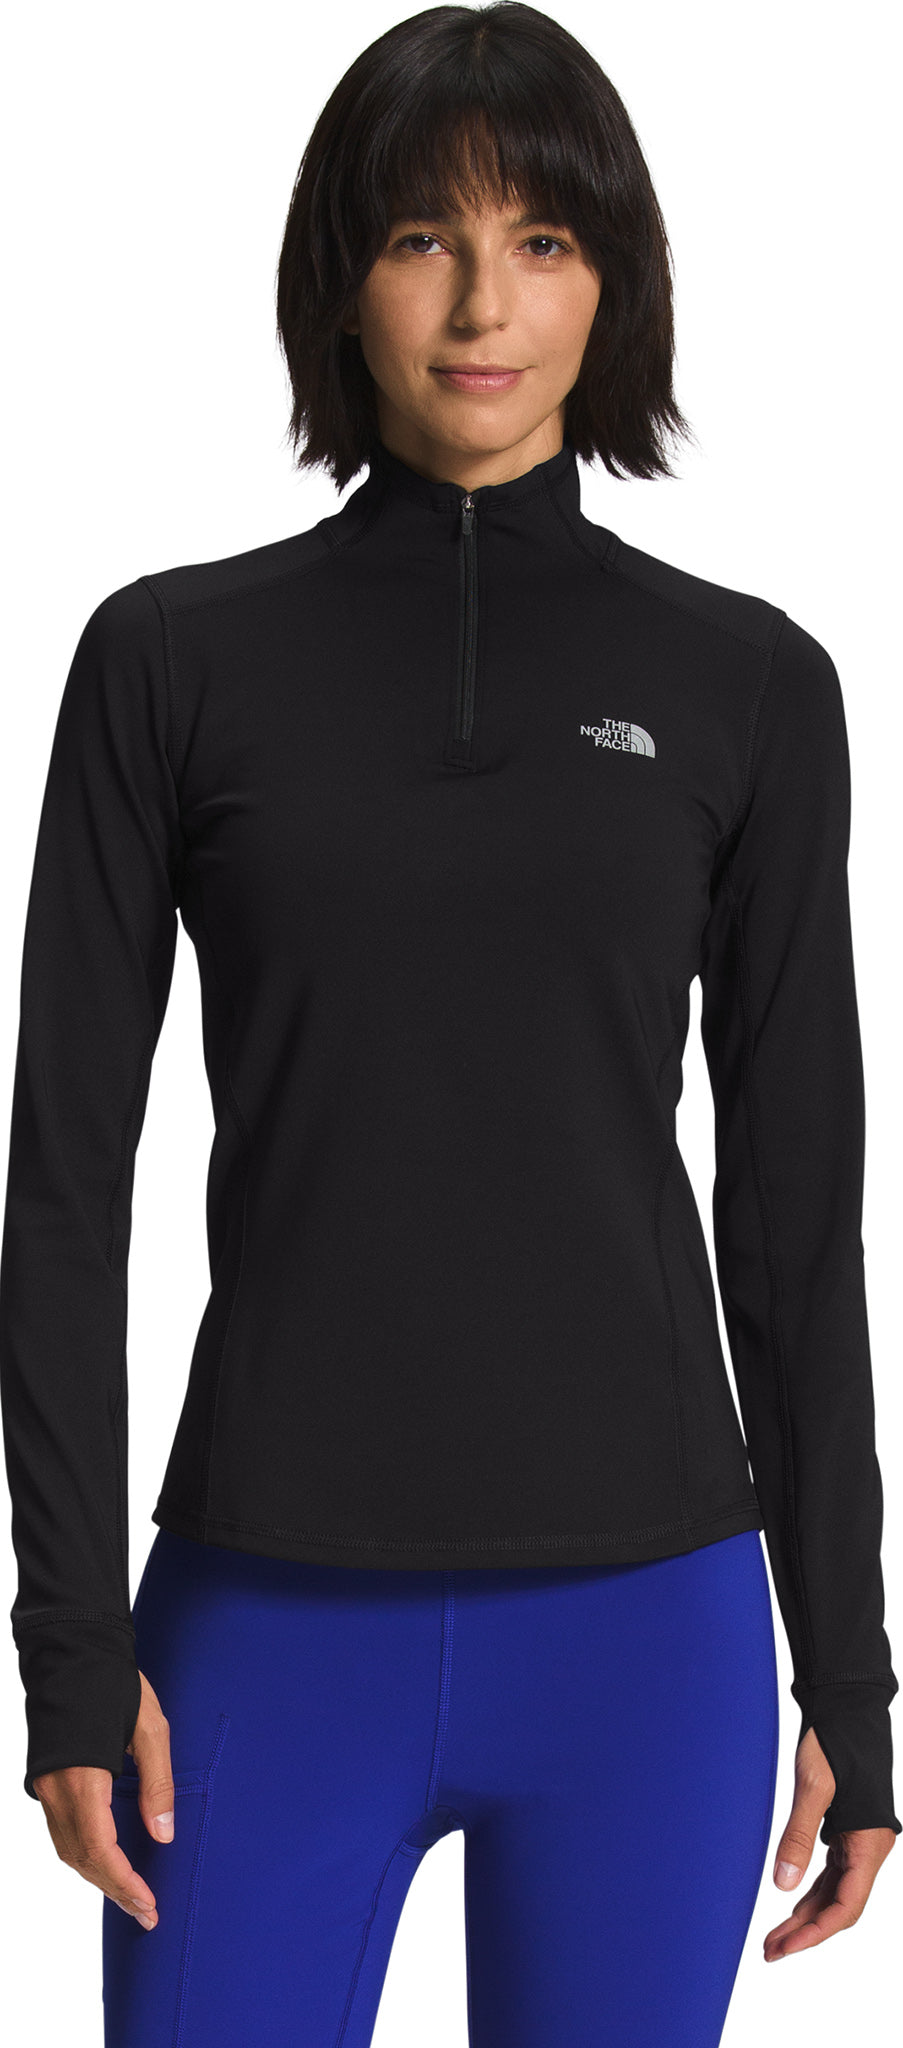 The North Face Printed Winter Warm Essential 1/4 Zip Base Layer - Women's